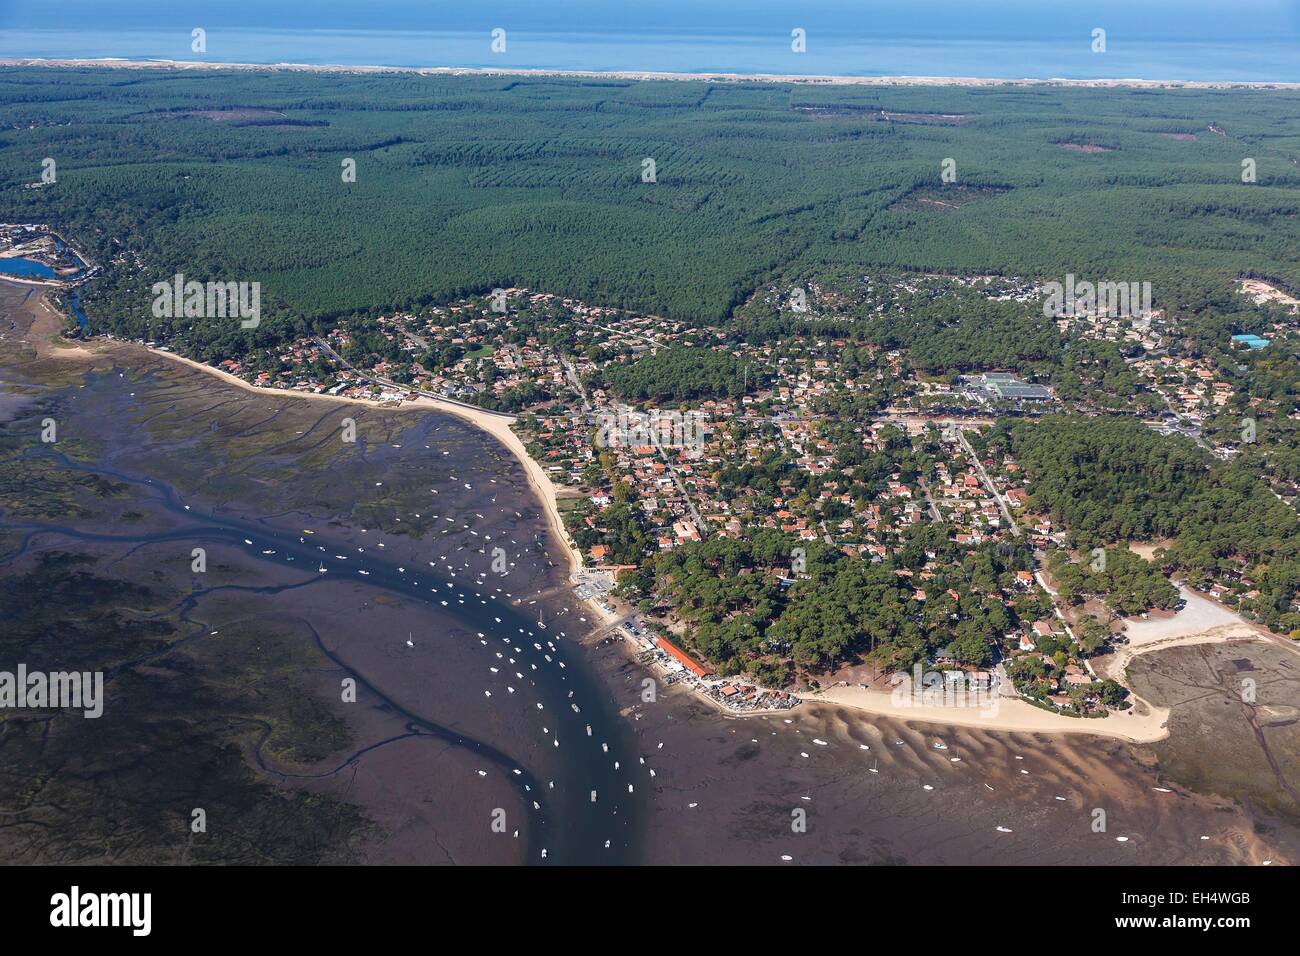 France, Gironde, Lege Cap Ferret, Claouey, the seaside resort on the Bassin d'Arcachon and the pine forest (aerial view) Stock Photo